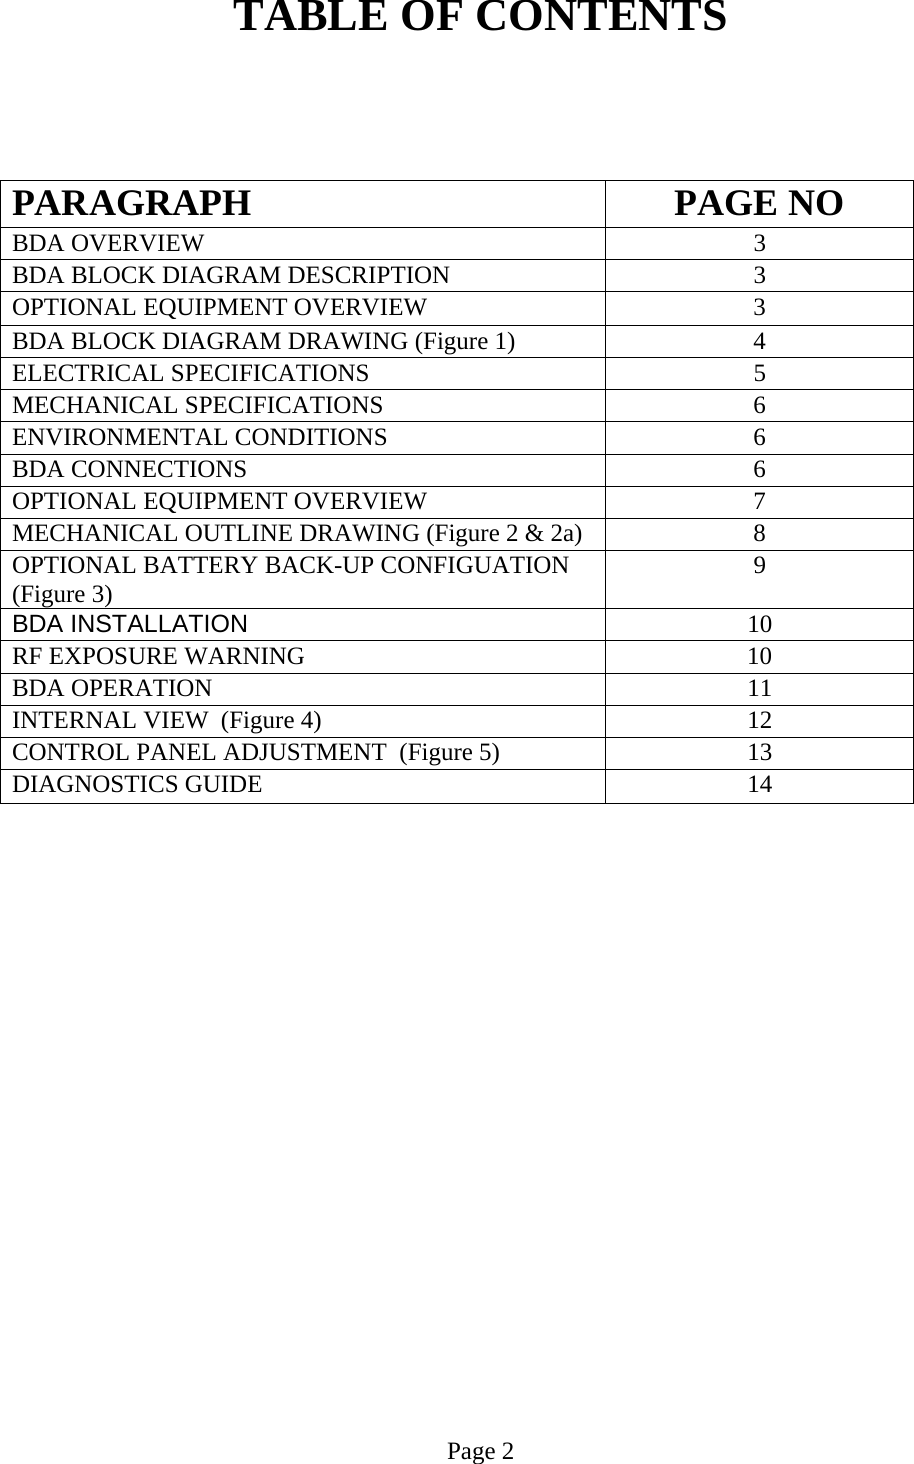 TABLE OF CONTENTS    PARAGRAPH PAGE NO BDA OVERVIEW   3 BDA BLOCK DIAGRAM DESCRIPTION 3 OPTIONAL EQUIPMENT OVERVIEW  3 BDA BLOCK DIAGRAM DRAWING (Figure 1)  4 ELECTRICAL SPECIFICATIONS   5  MECHANICAL SPECIFICATIONS   6 ENVIRONMENTAL CONDITIONS   6  BDA CONNECTIONS    6  OPTIONAL EQUIPMENT OVERVIEW  7 MECHANICAL OUTLINE DRAWING (Figure 2 &amp; 2a)  8 OPTIONAL BATTERY BACK-UP CONFIGUATION (Figure 3)  9 BDA INSTALLATION  10 RF EXPOSURE WARNING   10 BDA OPERATION 11 INTERNAL VIEW  (Figure 4)  12 CONTROL PANEL ADJUSTMENT  (Figure 5)  13 DIAGNOSTICS GUIDE  14                        Page 2  